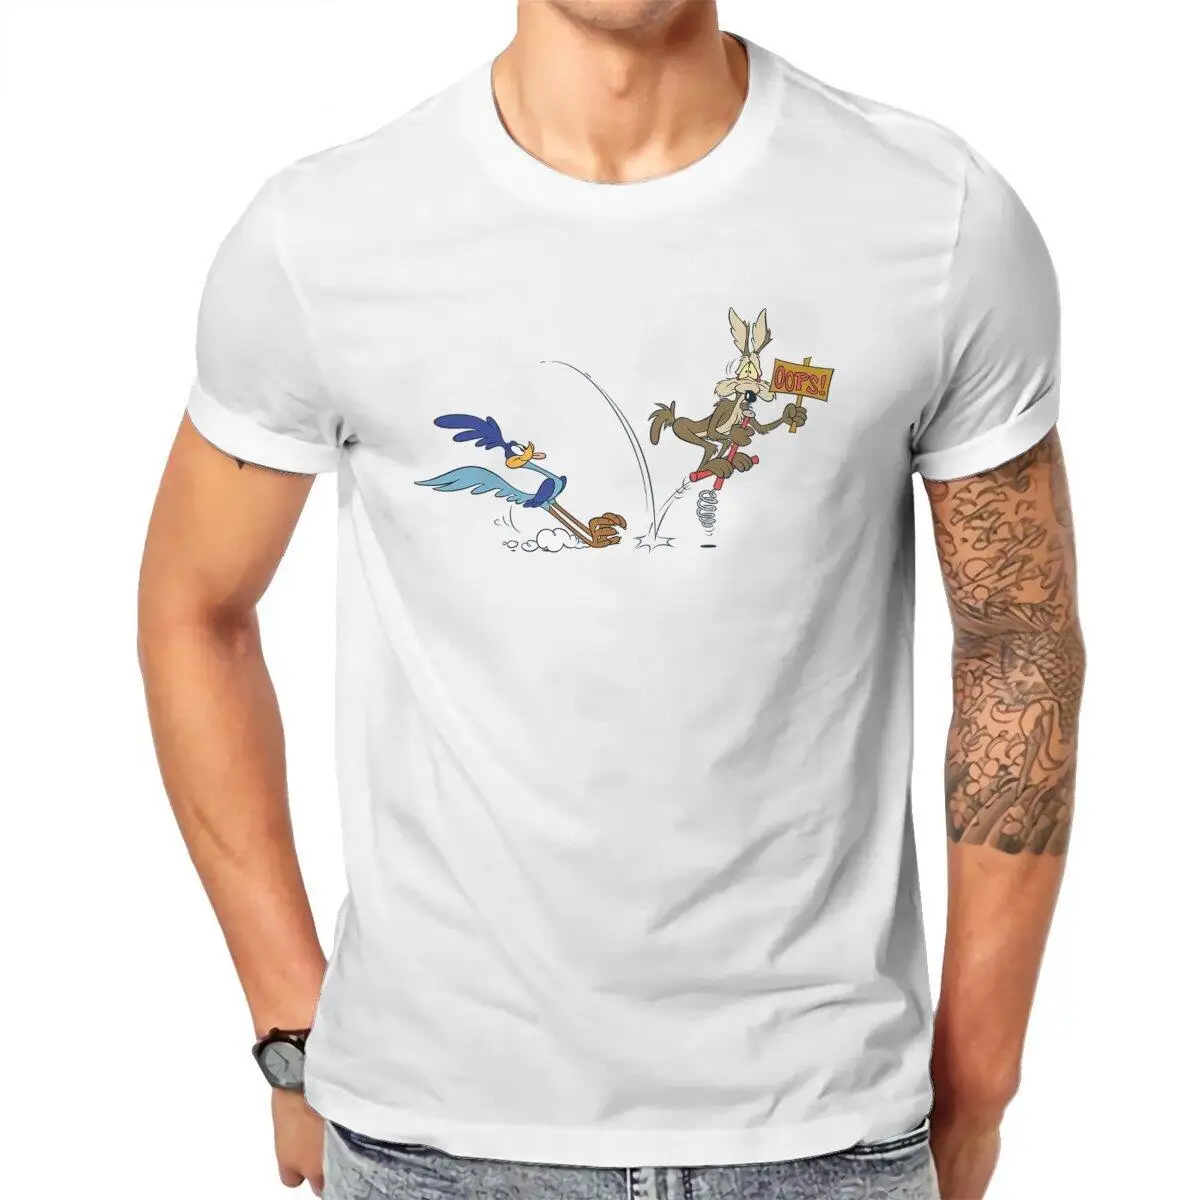 

Wile E Coyote And Road Runner T Shirts Men's 100% Cotton Humor T-Shirts Crewneck Tee Shirt Short Sleeve Clothes Gift Idea